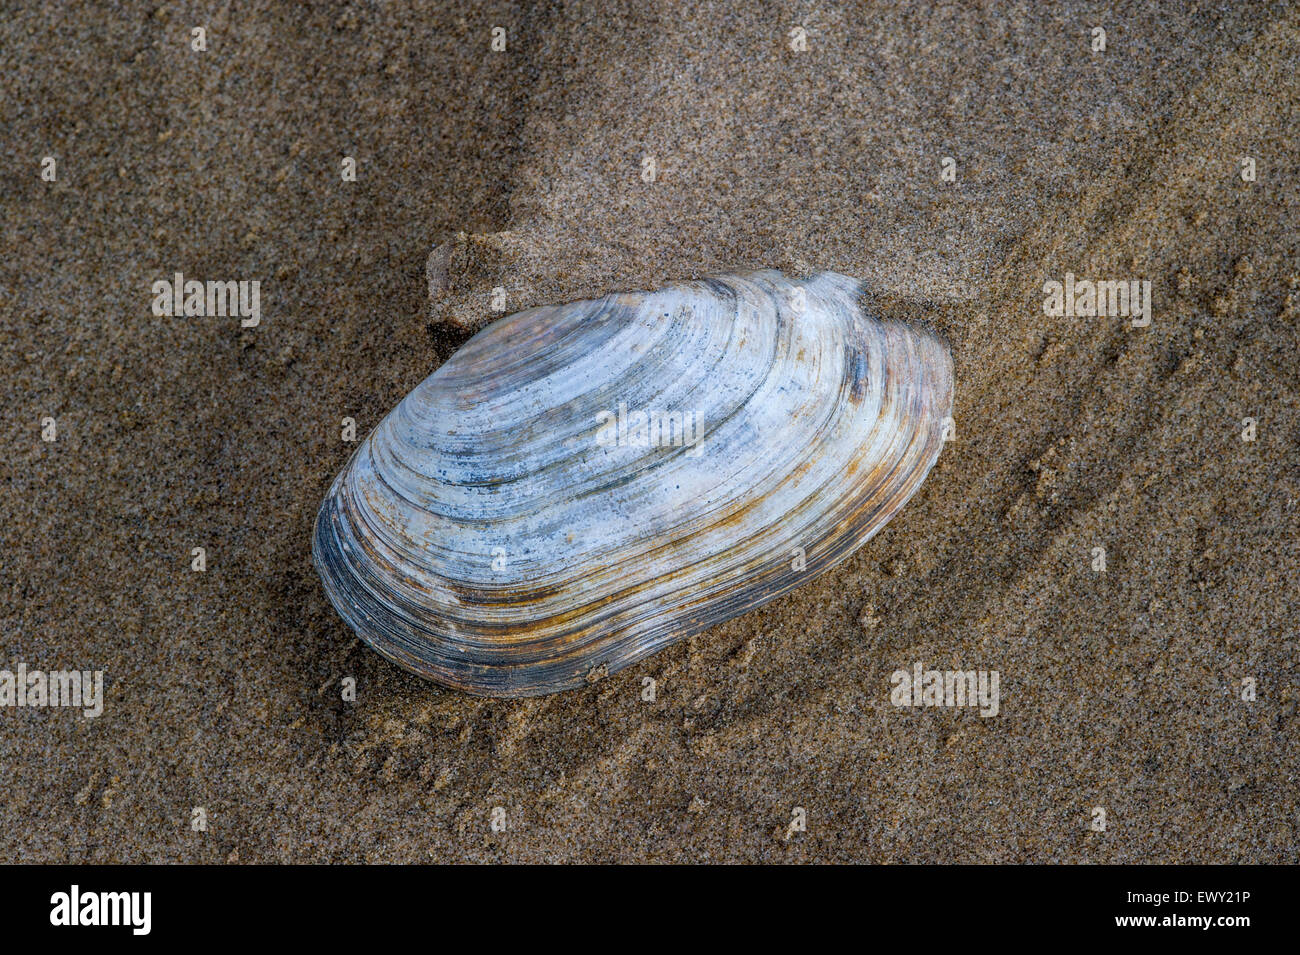 Common Otter Shell - Lutraria lutraria on sandy beach Stock Photo